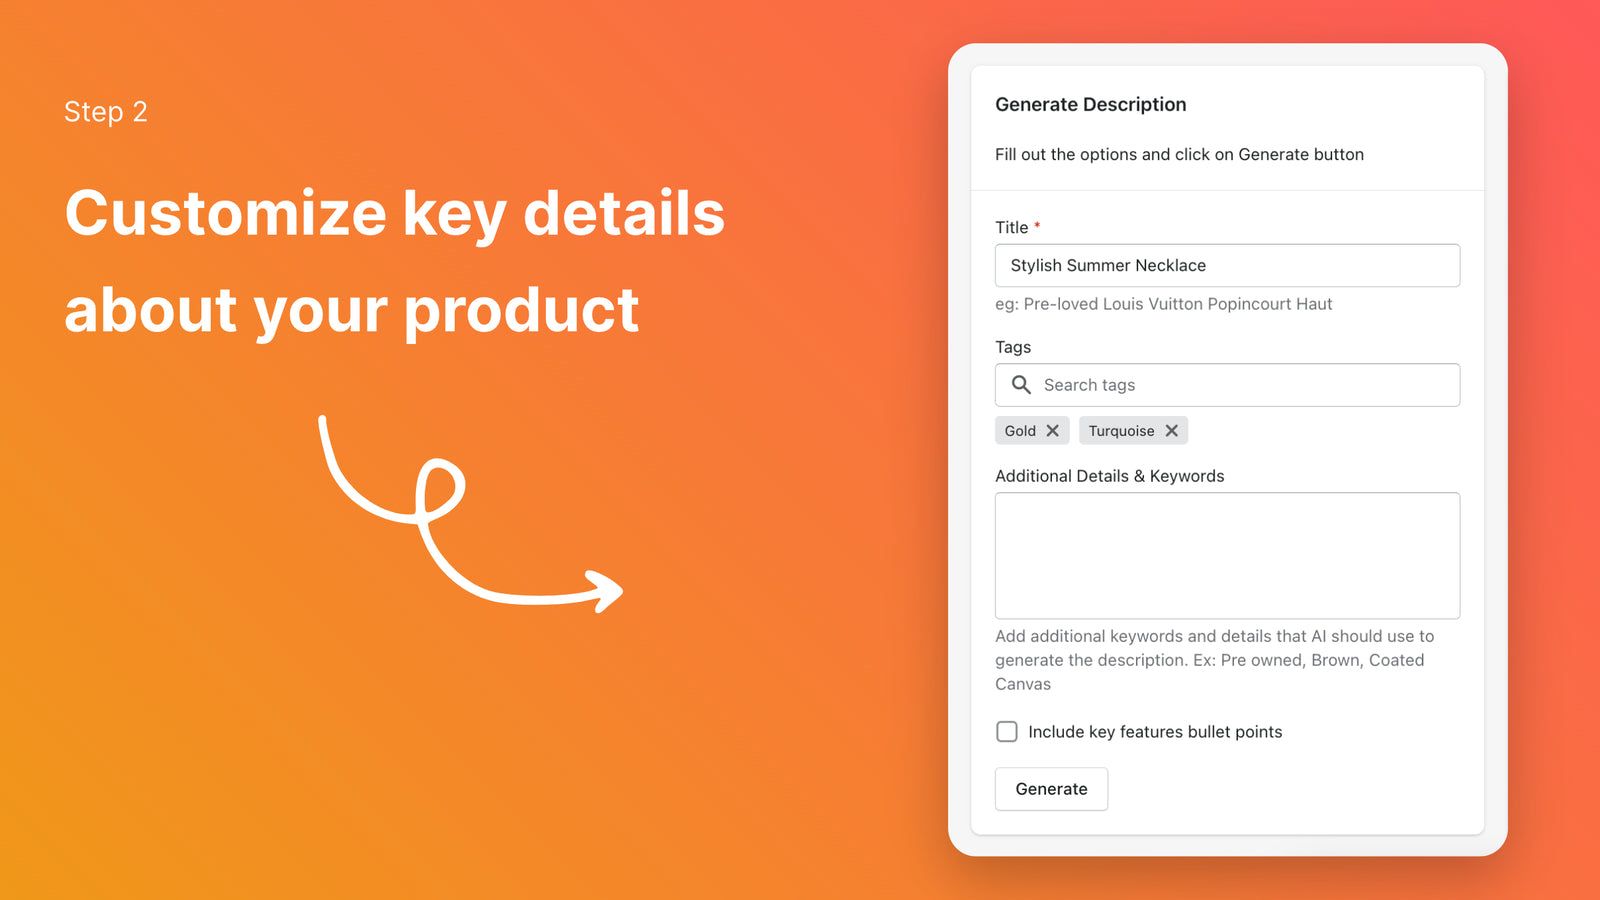 Step 2: Customize key details about your product